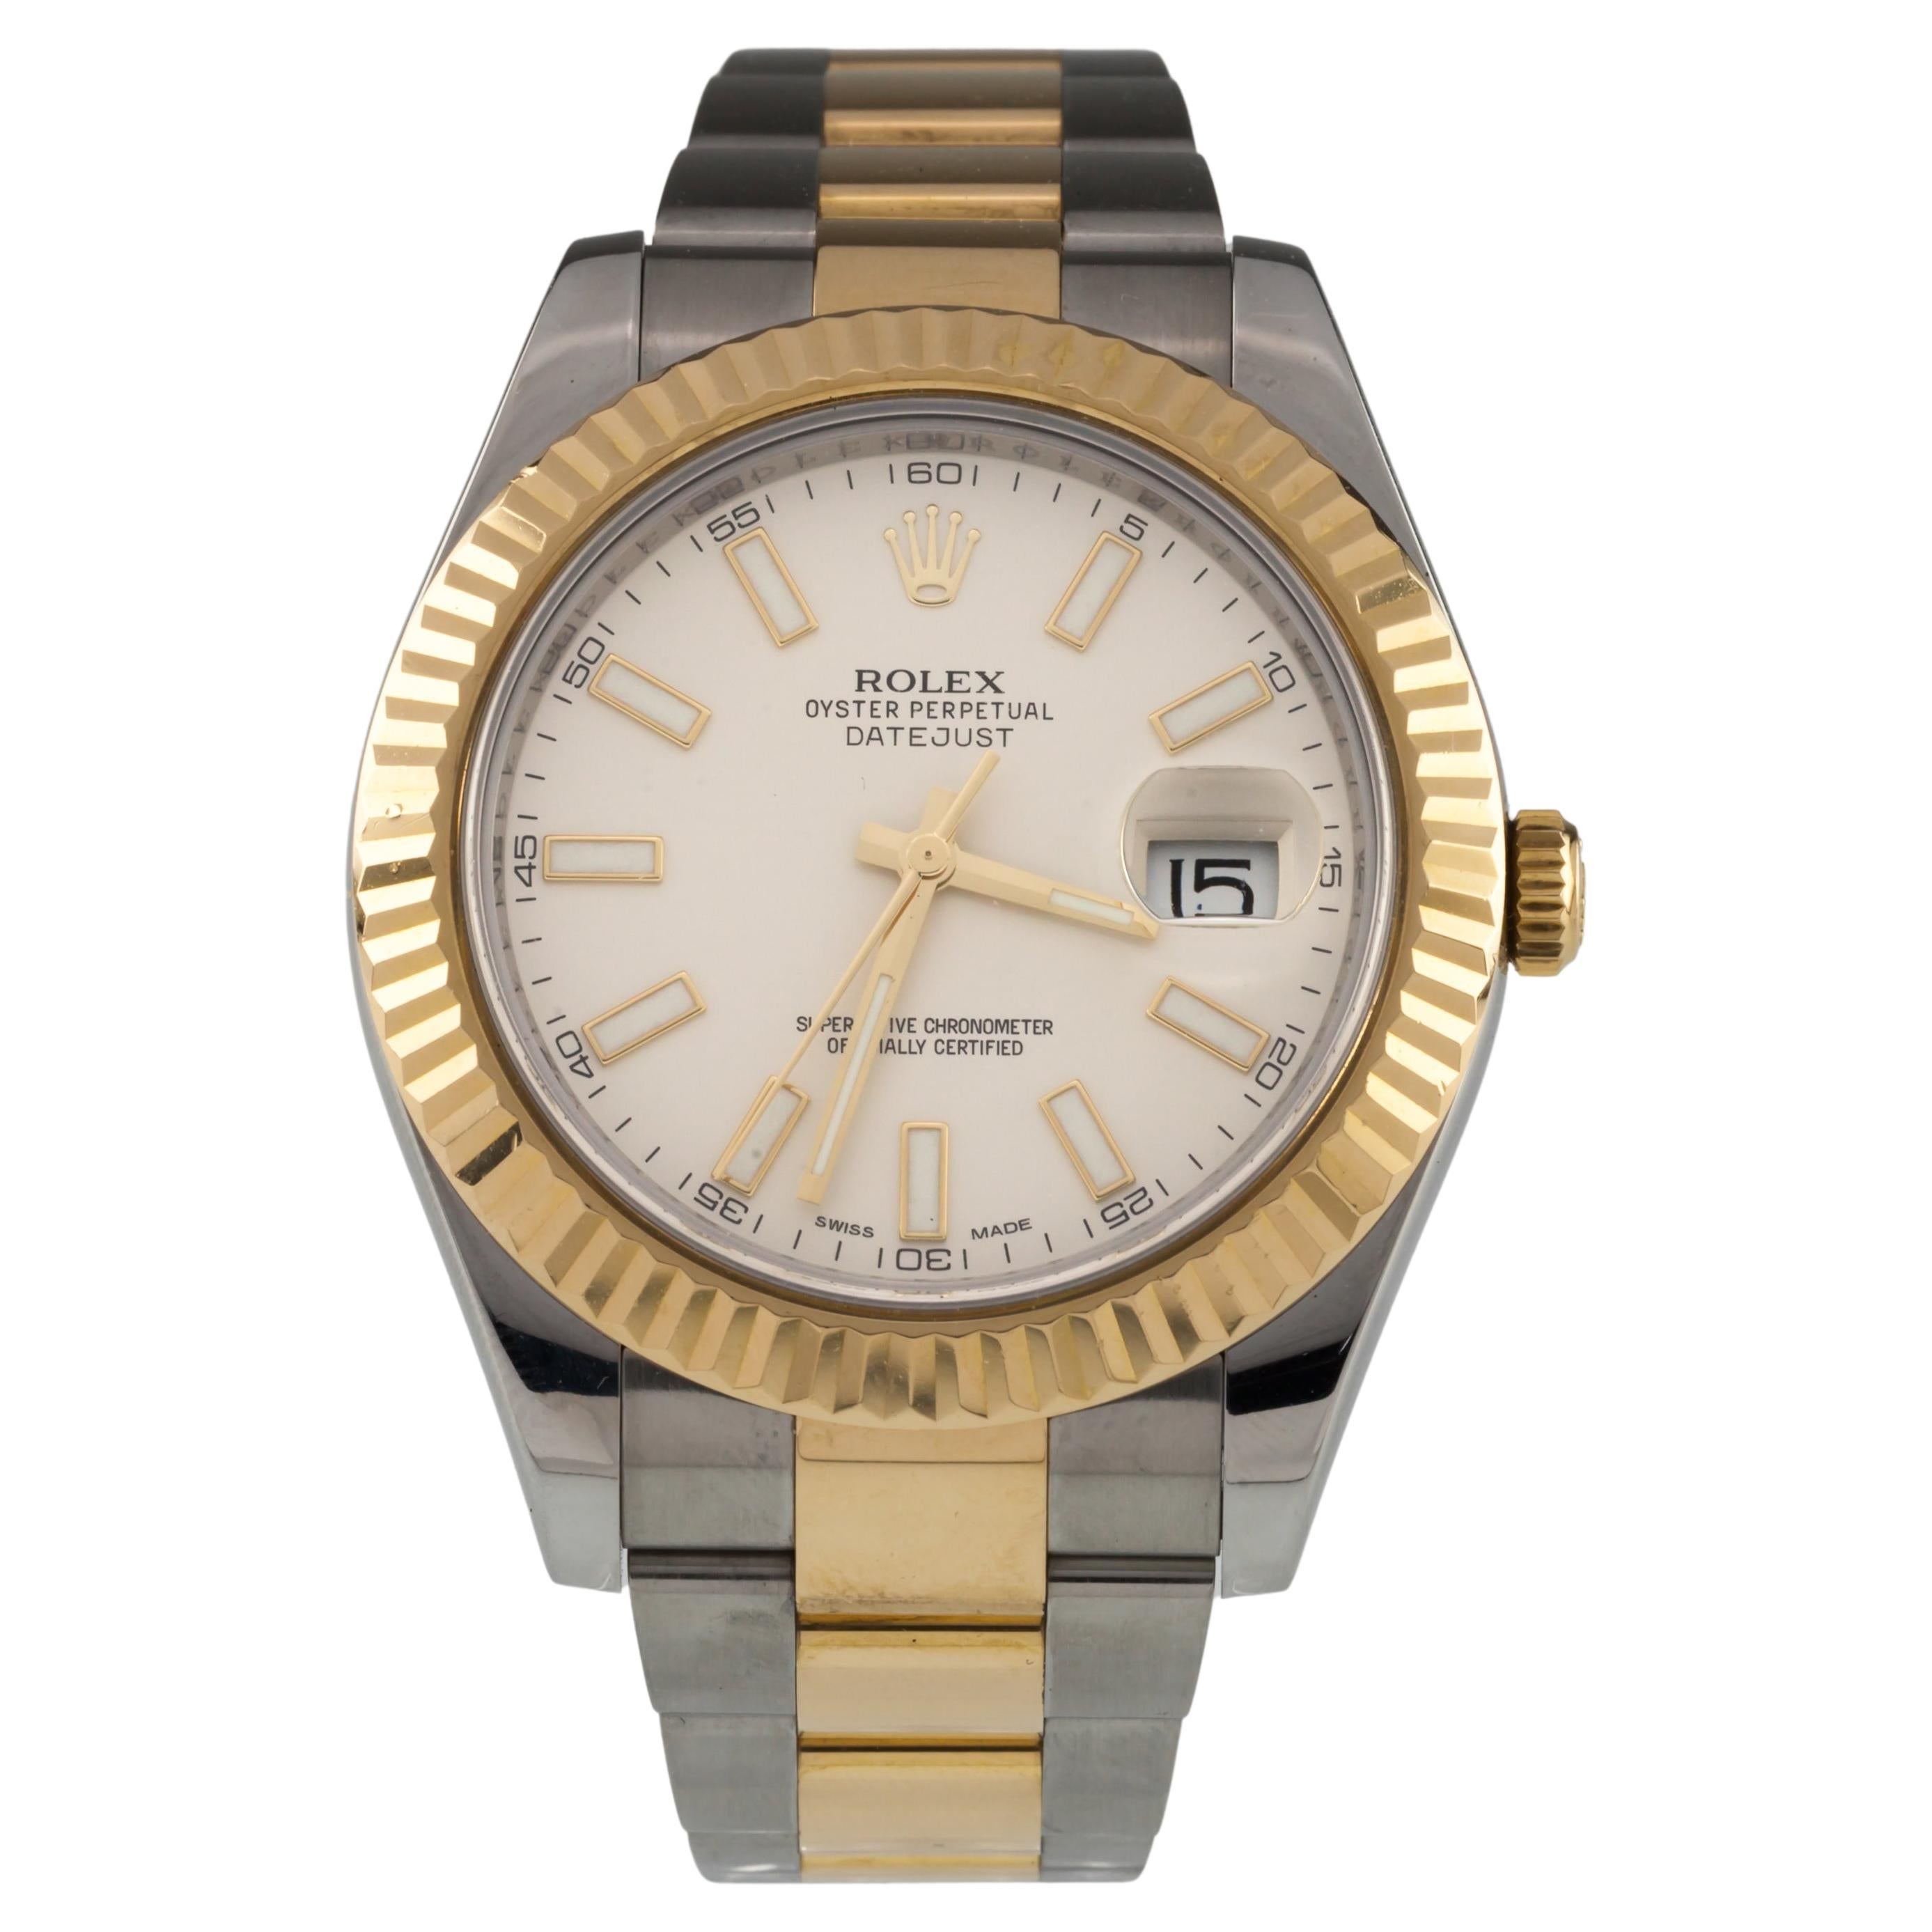 Rolex Two-Tone 18k Gold + Stainless Men's OPDJ 116333 Automatic Watch 2010 For Sale